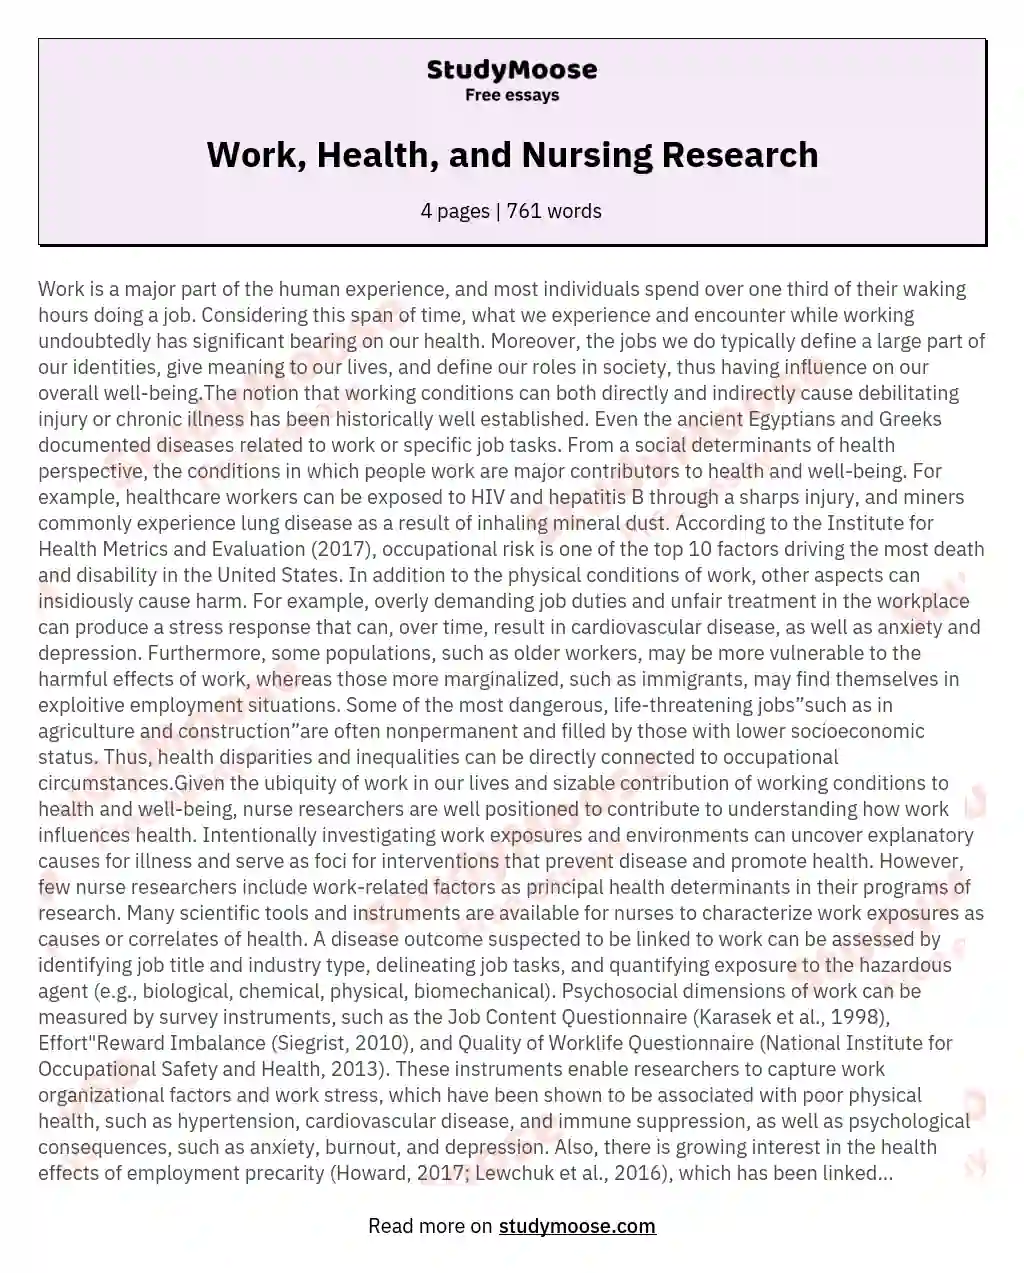 Work, Health, and Nursing Research essay